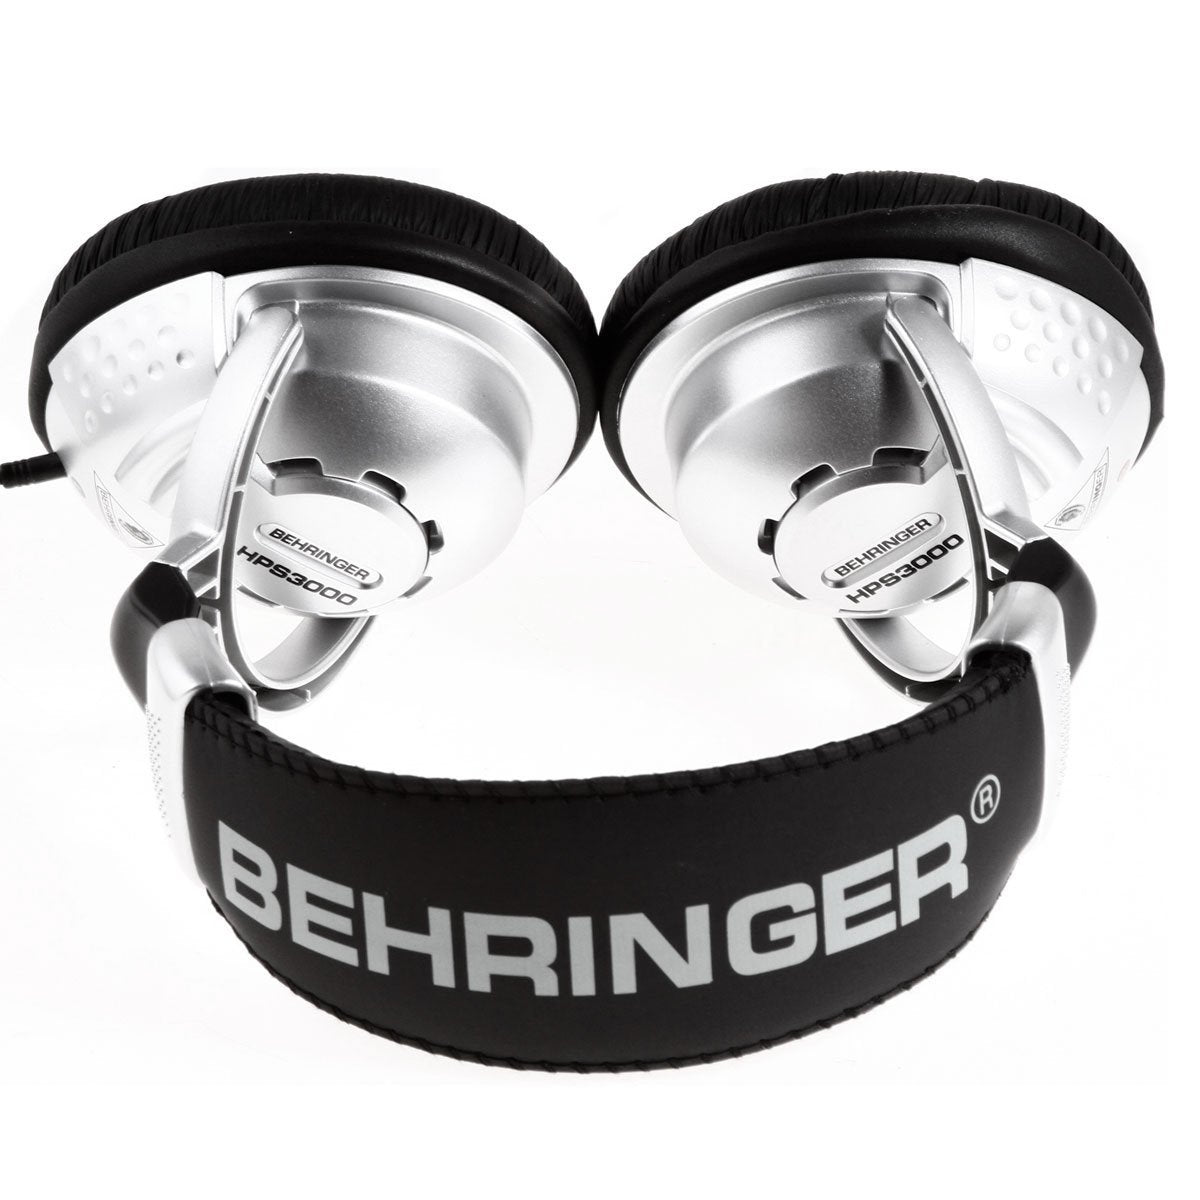 Behringer HPS3000 On-Ear Wired Studio Headset with High-definition Bass and Ultra-wide Dynamic Range